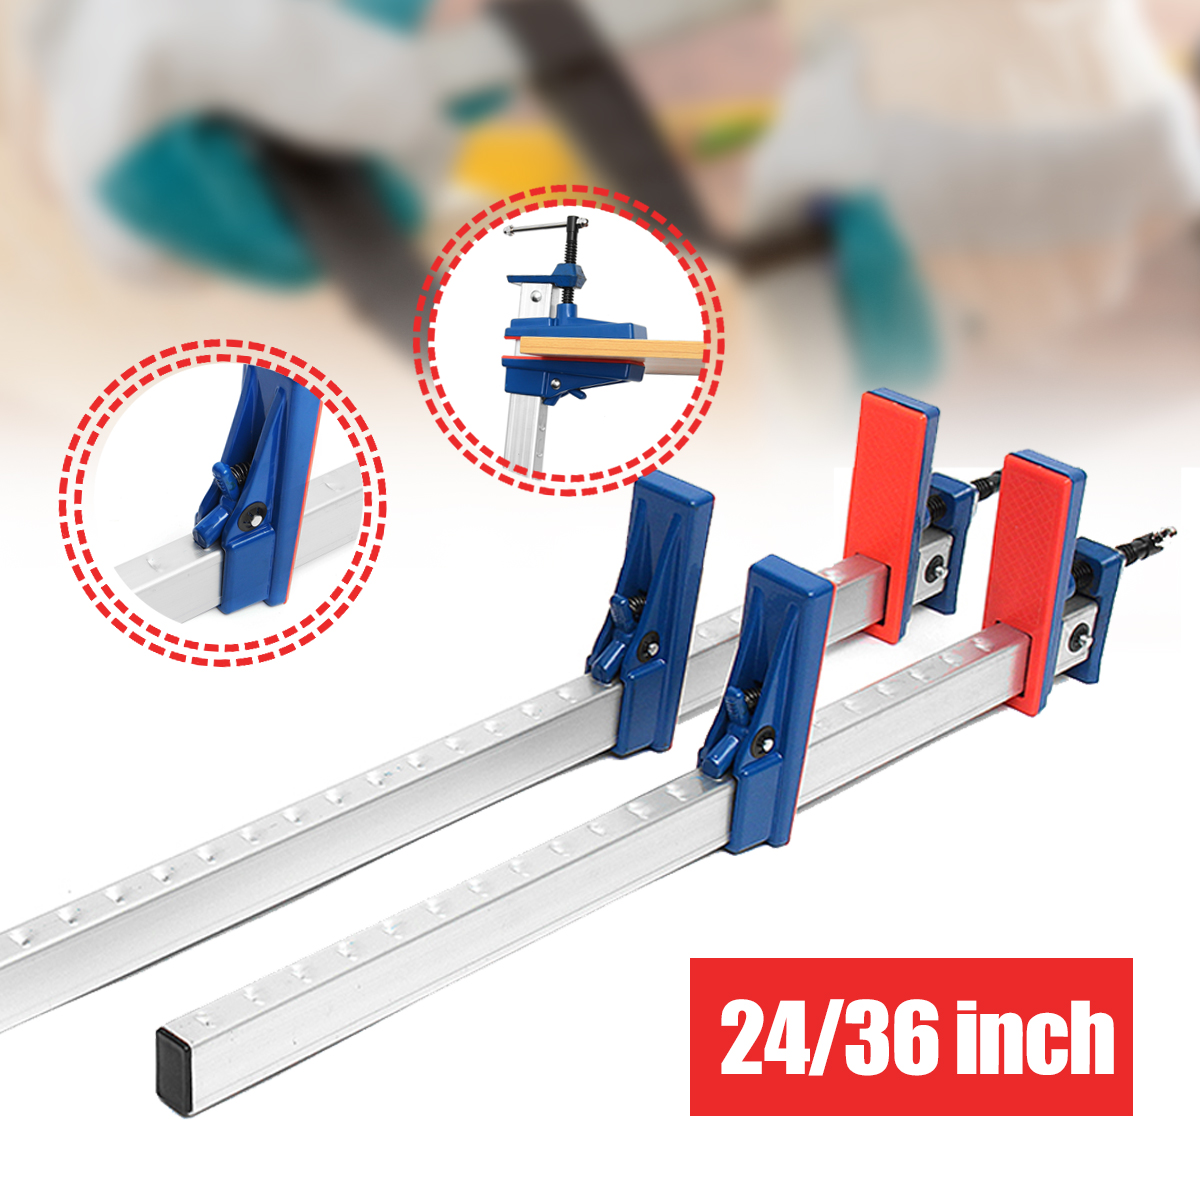 2436-Inch-Aluminum-F-Clamp-Bar-Heavy-Duty-Holder-Grip-Release-Parallel-Adjustable-Woodworking-Tool-1361735-2